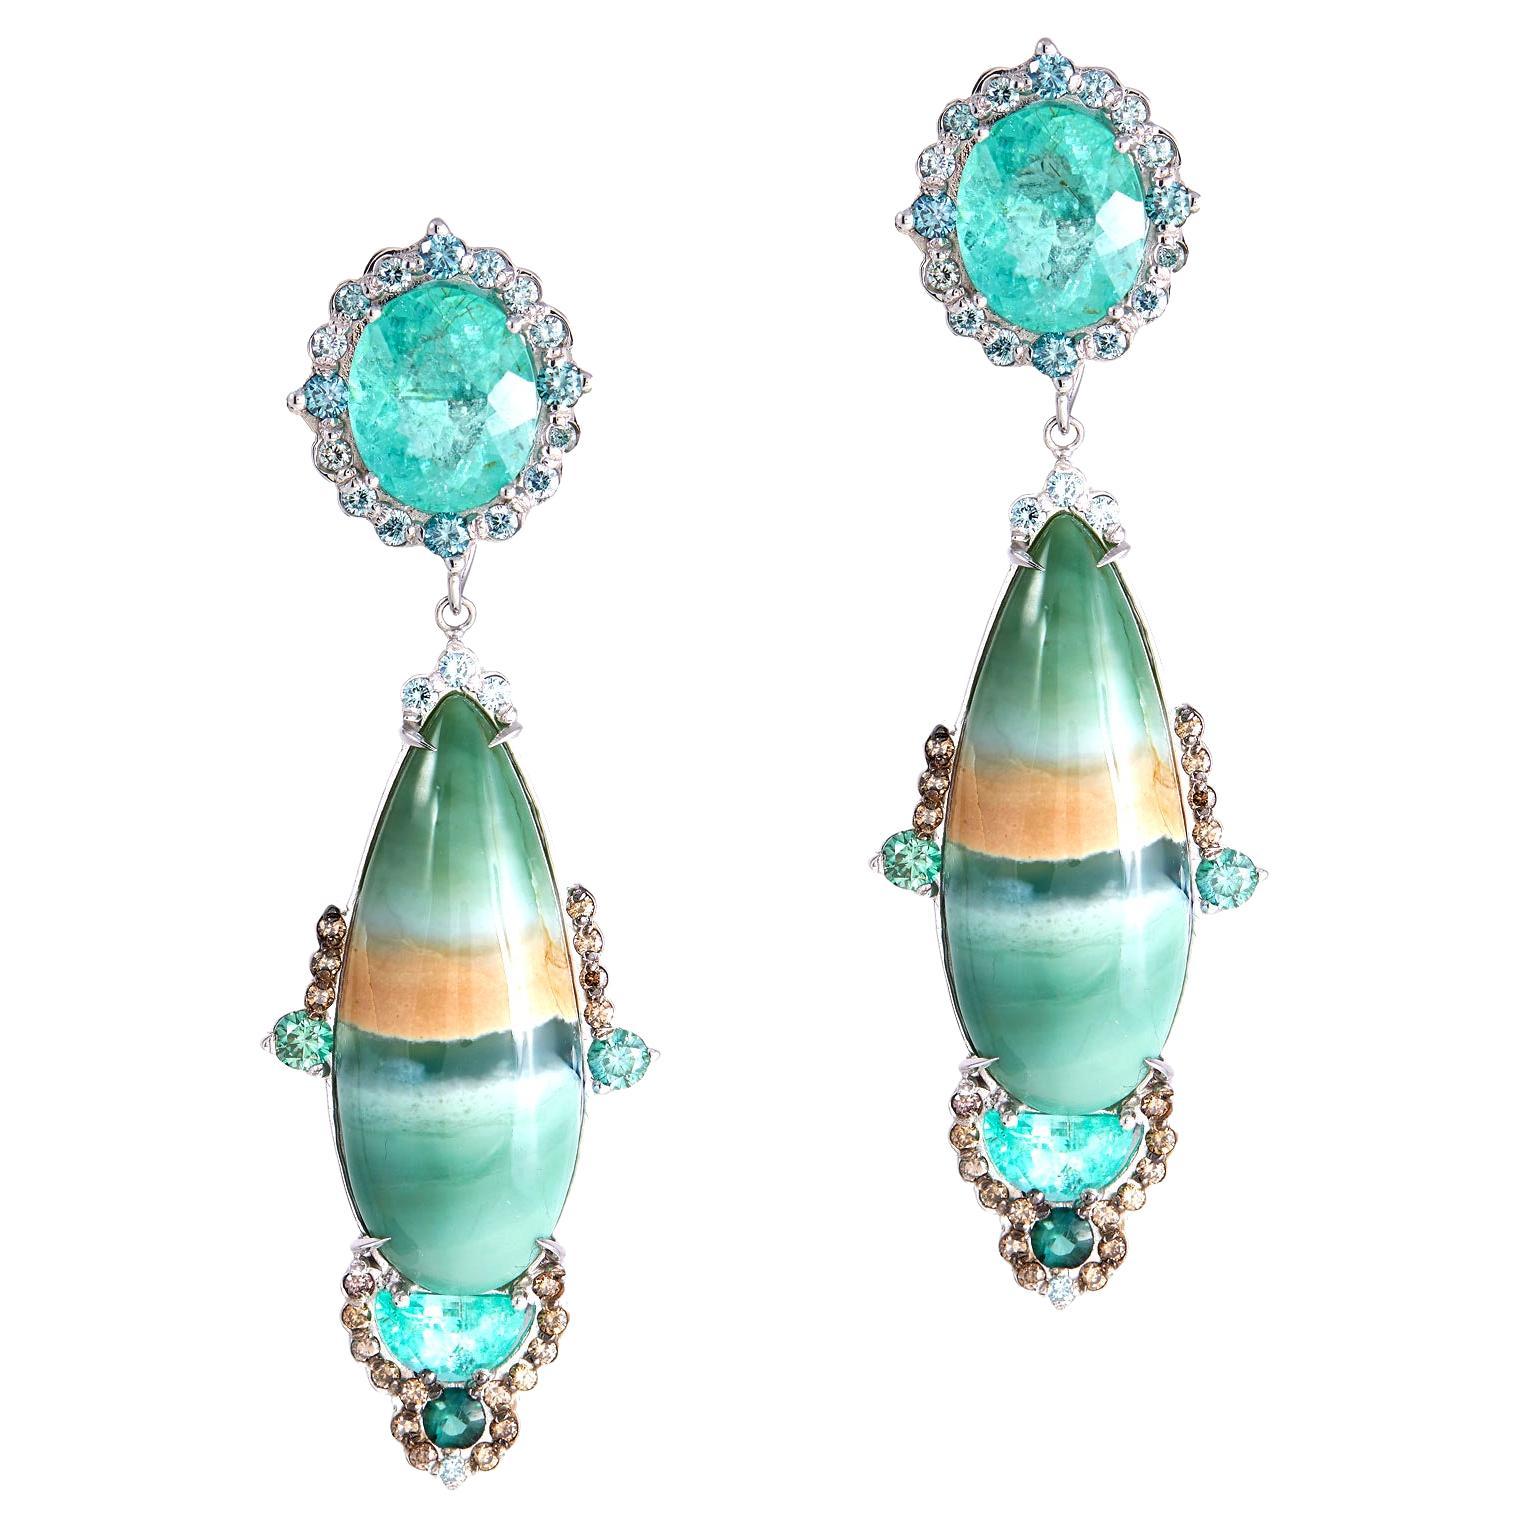 Rare Paraiba tourmaline and diamond earrings, by Carvin French at 1stDibs